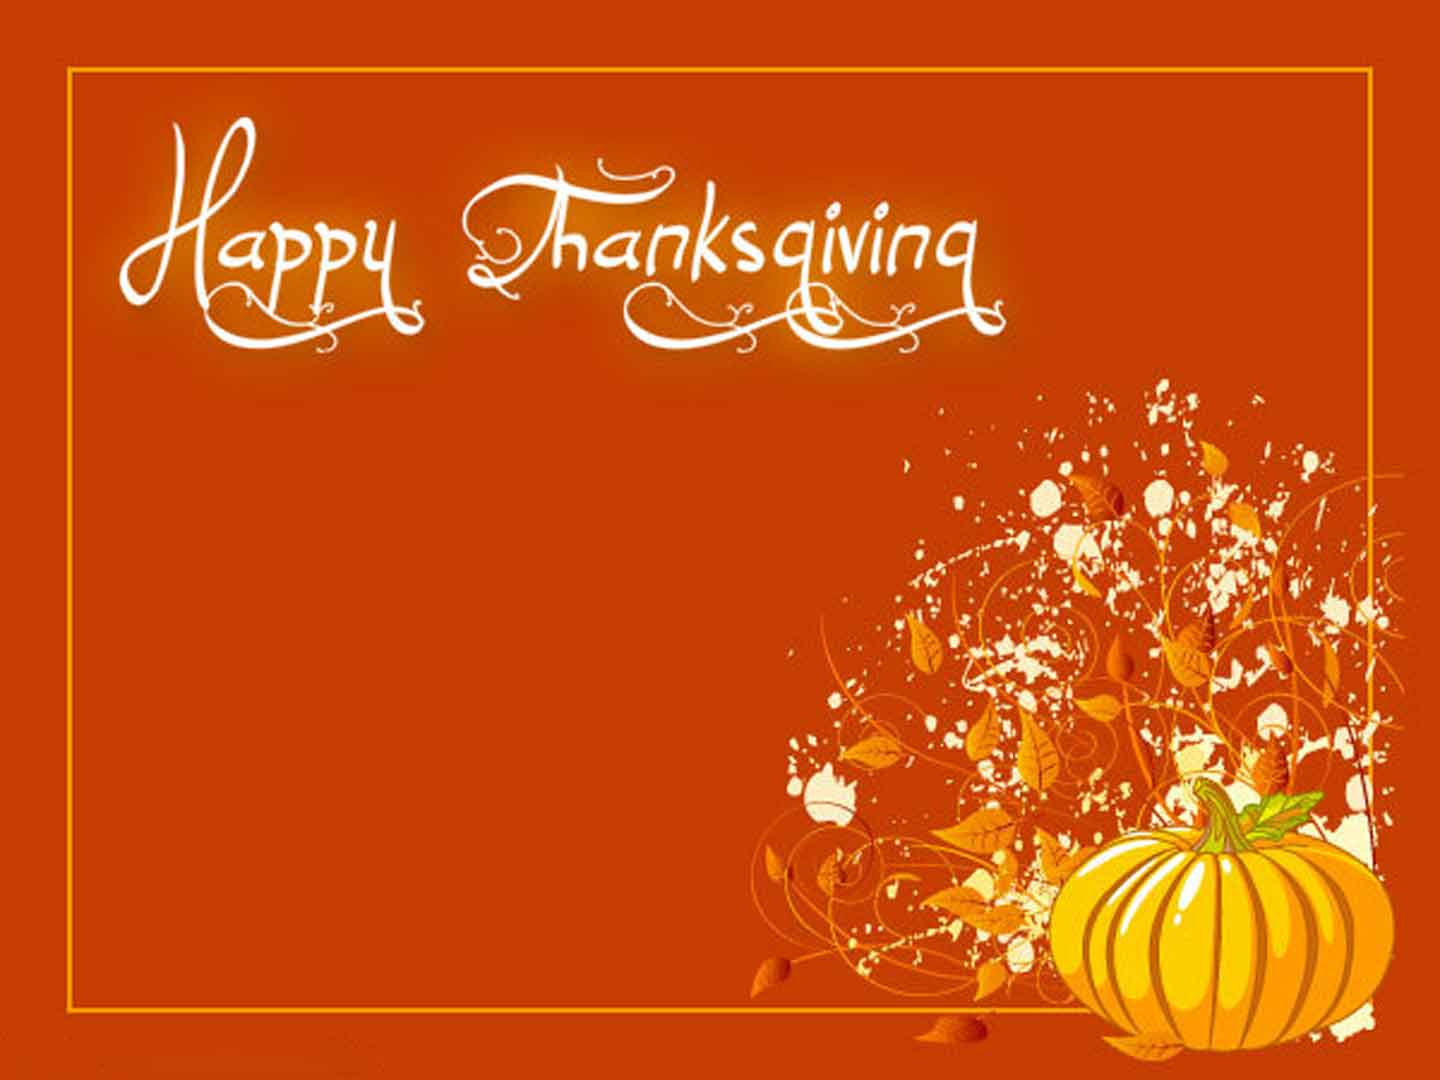 Thanksgiving Quotes Wallpaper
 Happy Thanksgiving Wallpapers Wallpaper Cave